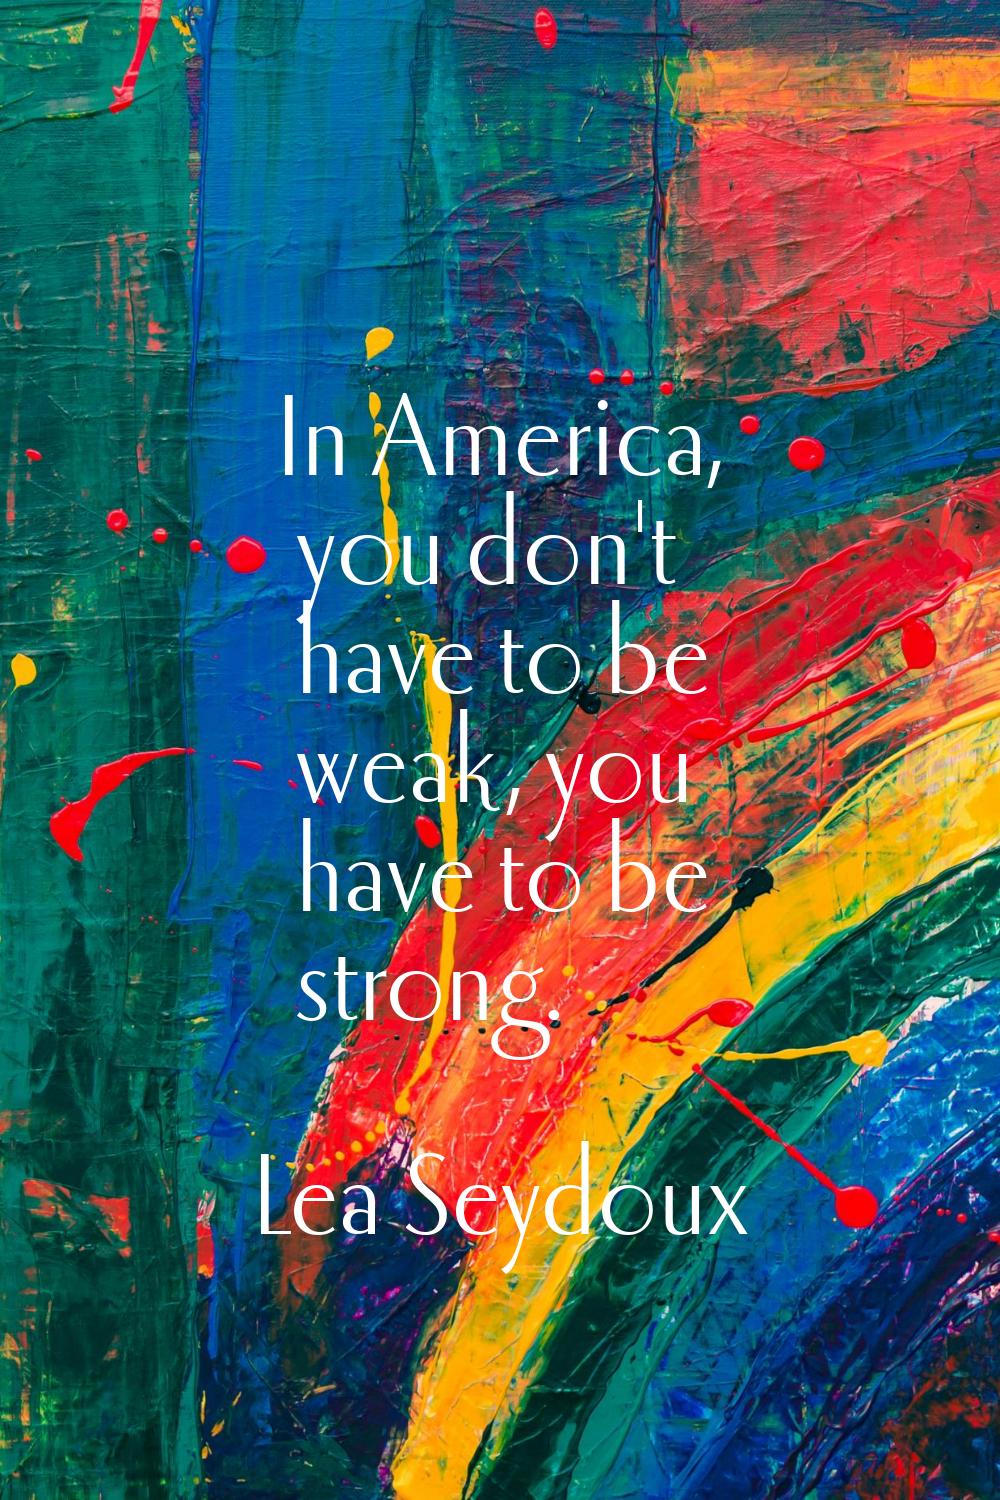 In America, you don't have to be weak, you have to be strong.